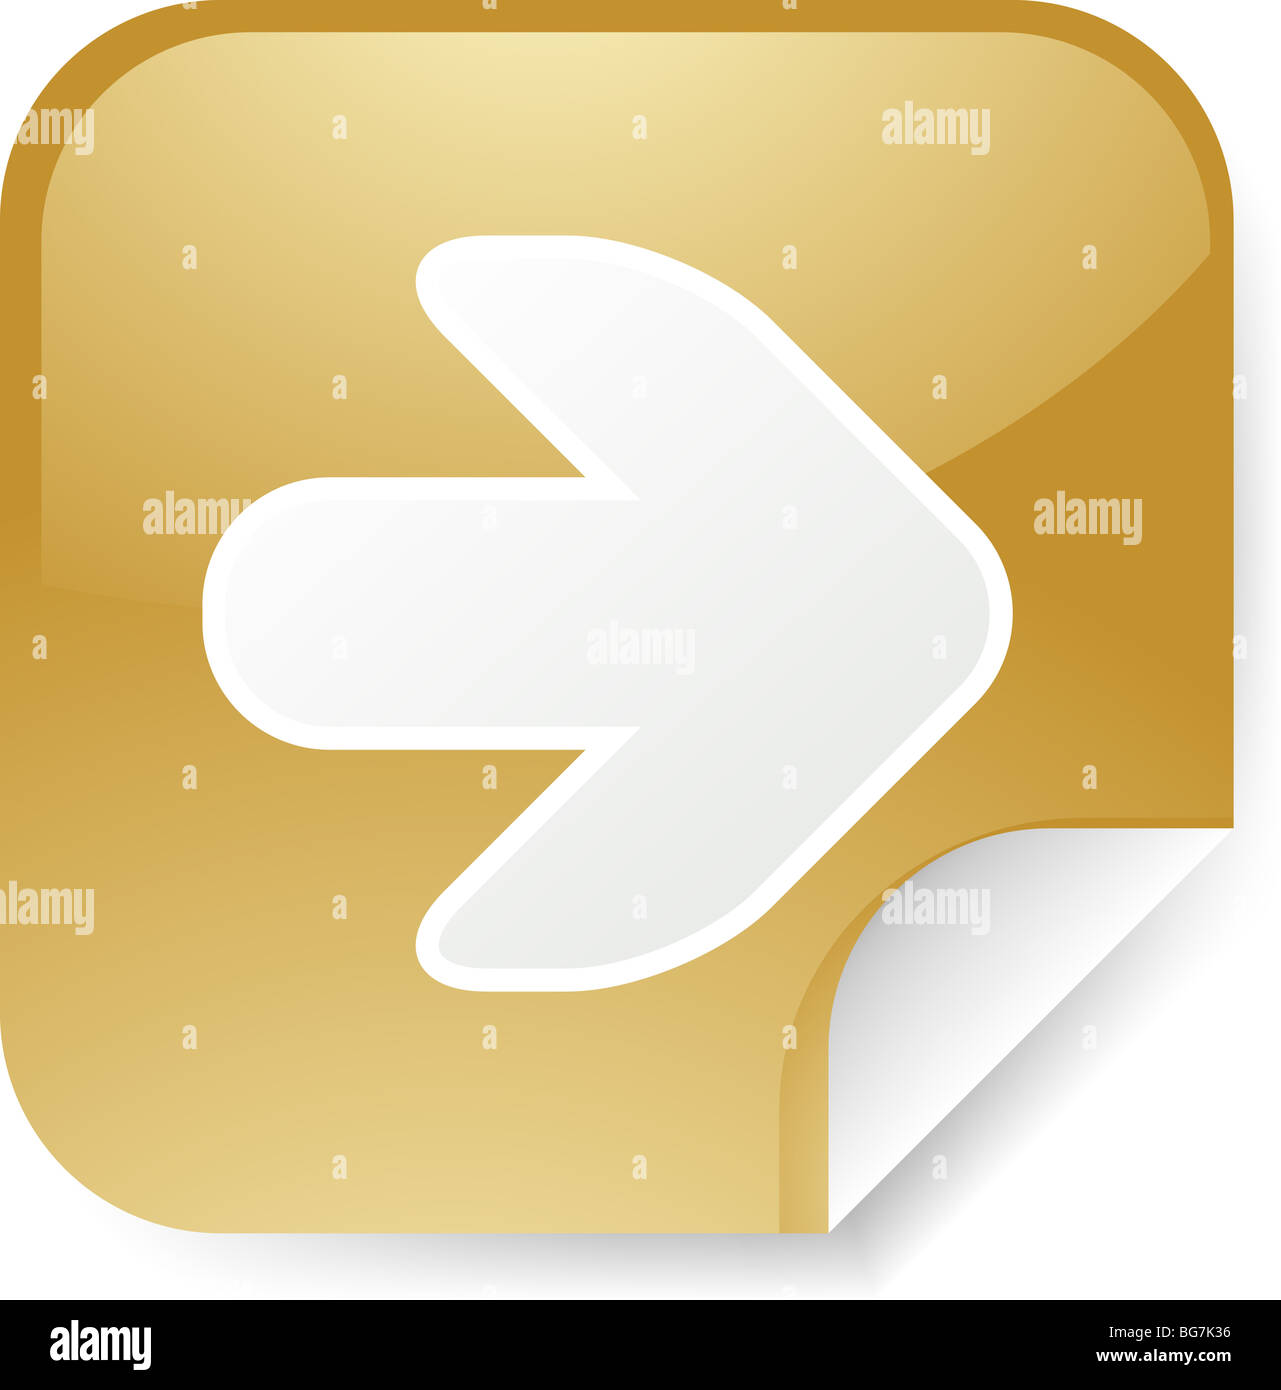 Navigation icon sticker with arrow pointing right Stock Photo